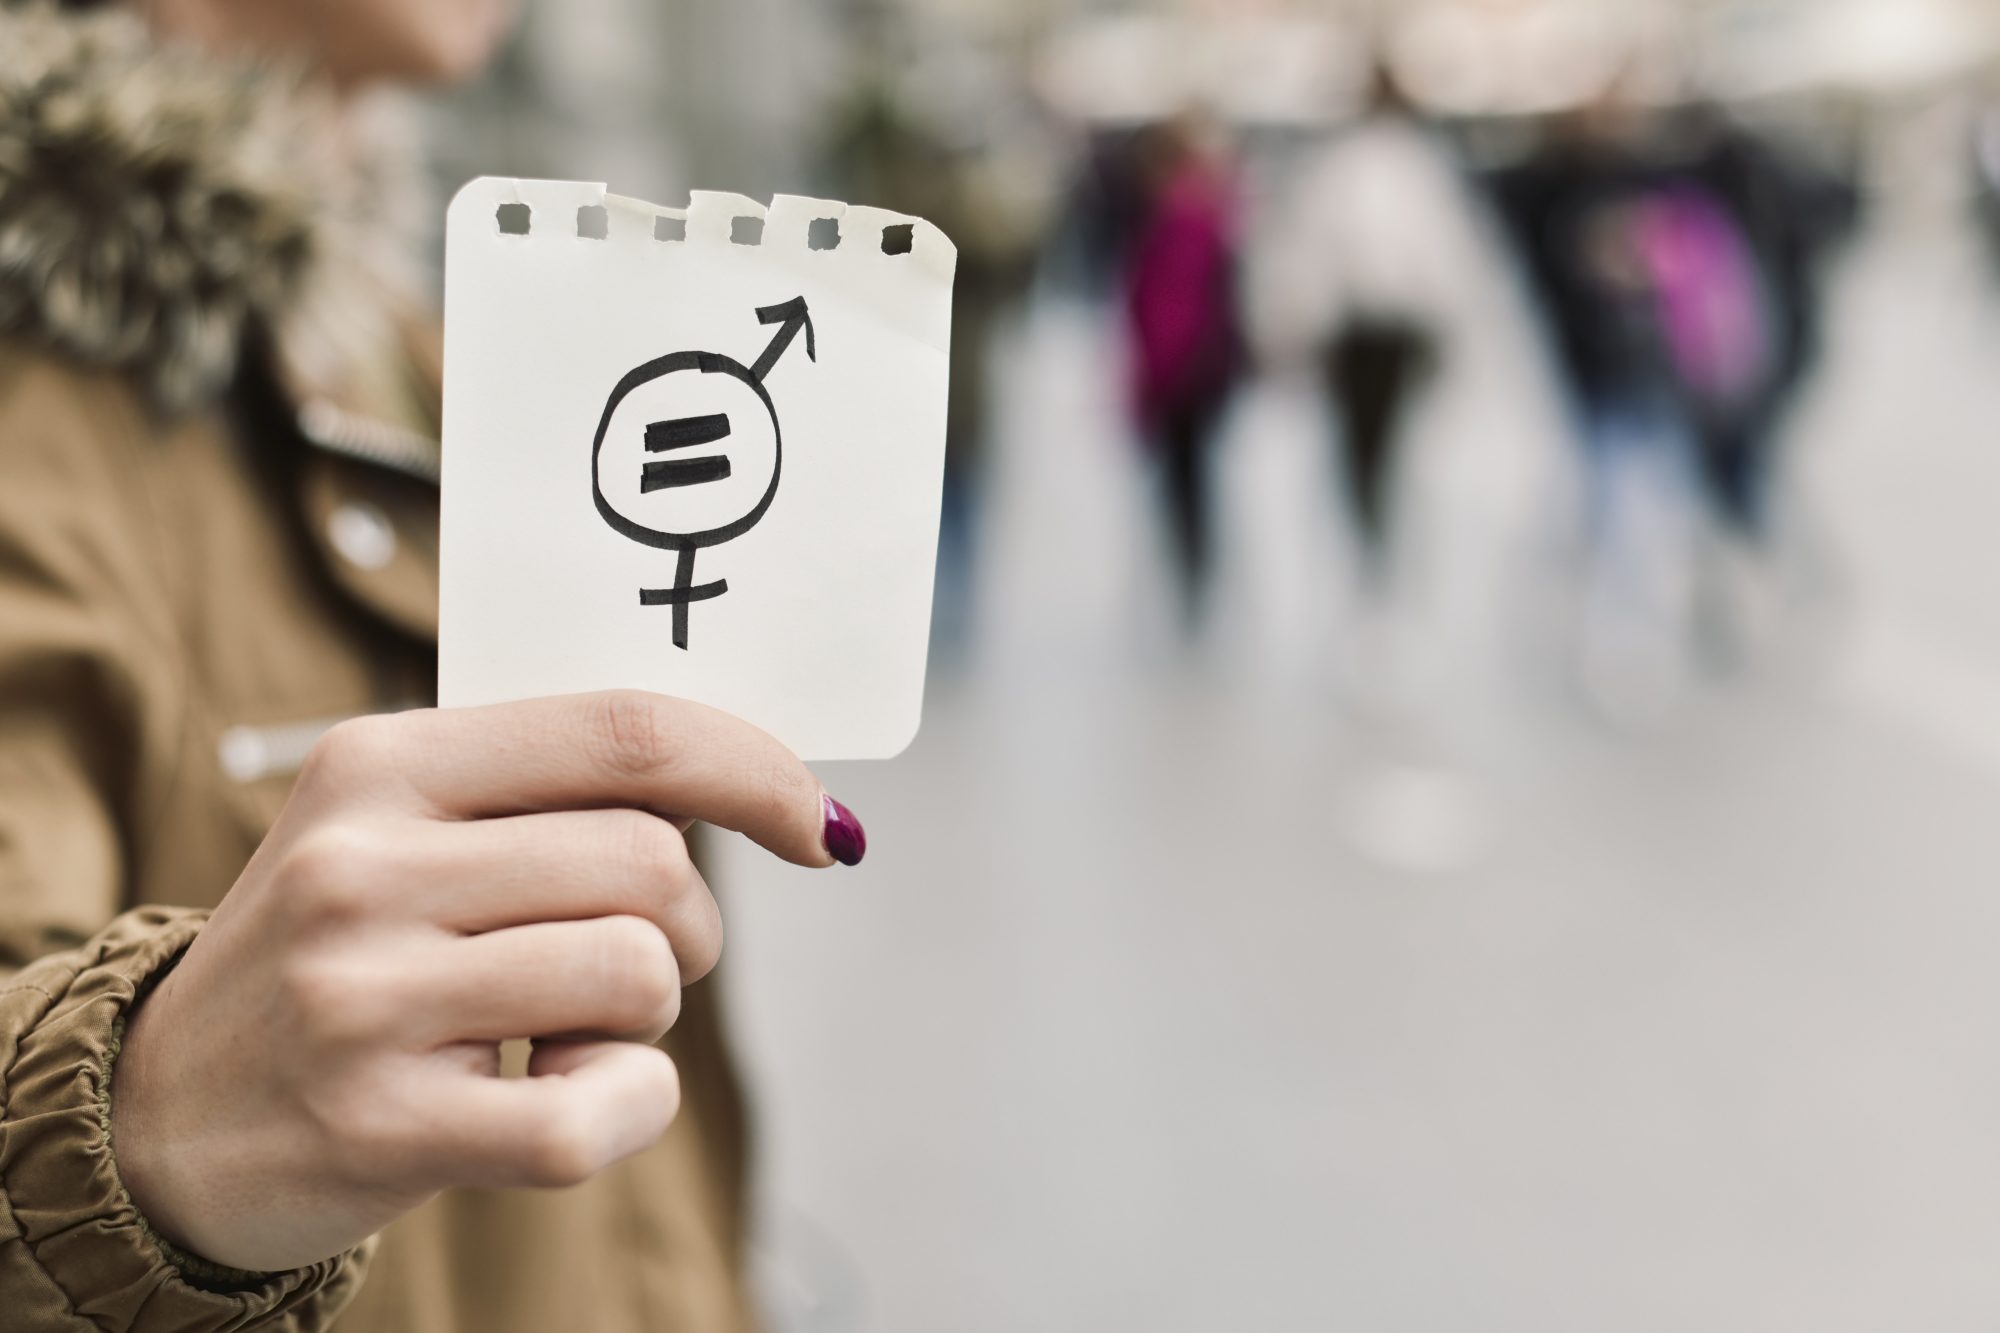 How Is Gender Equality Discuss on Women's DayHelloGiggles